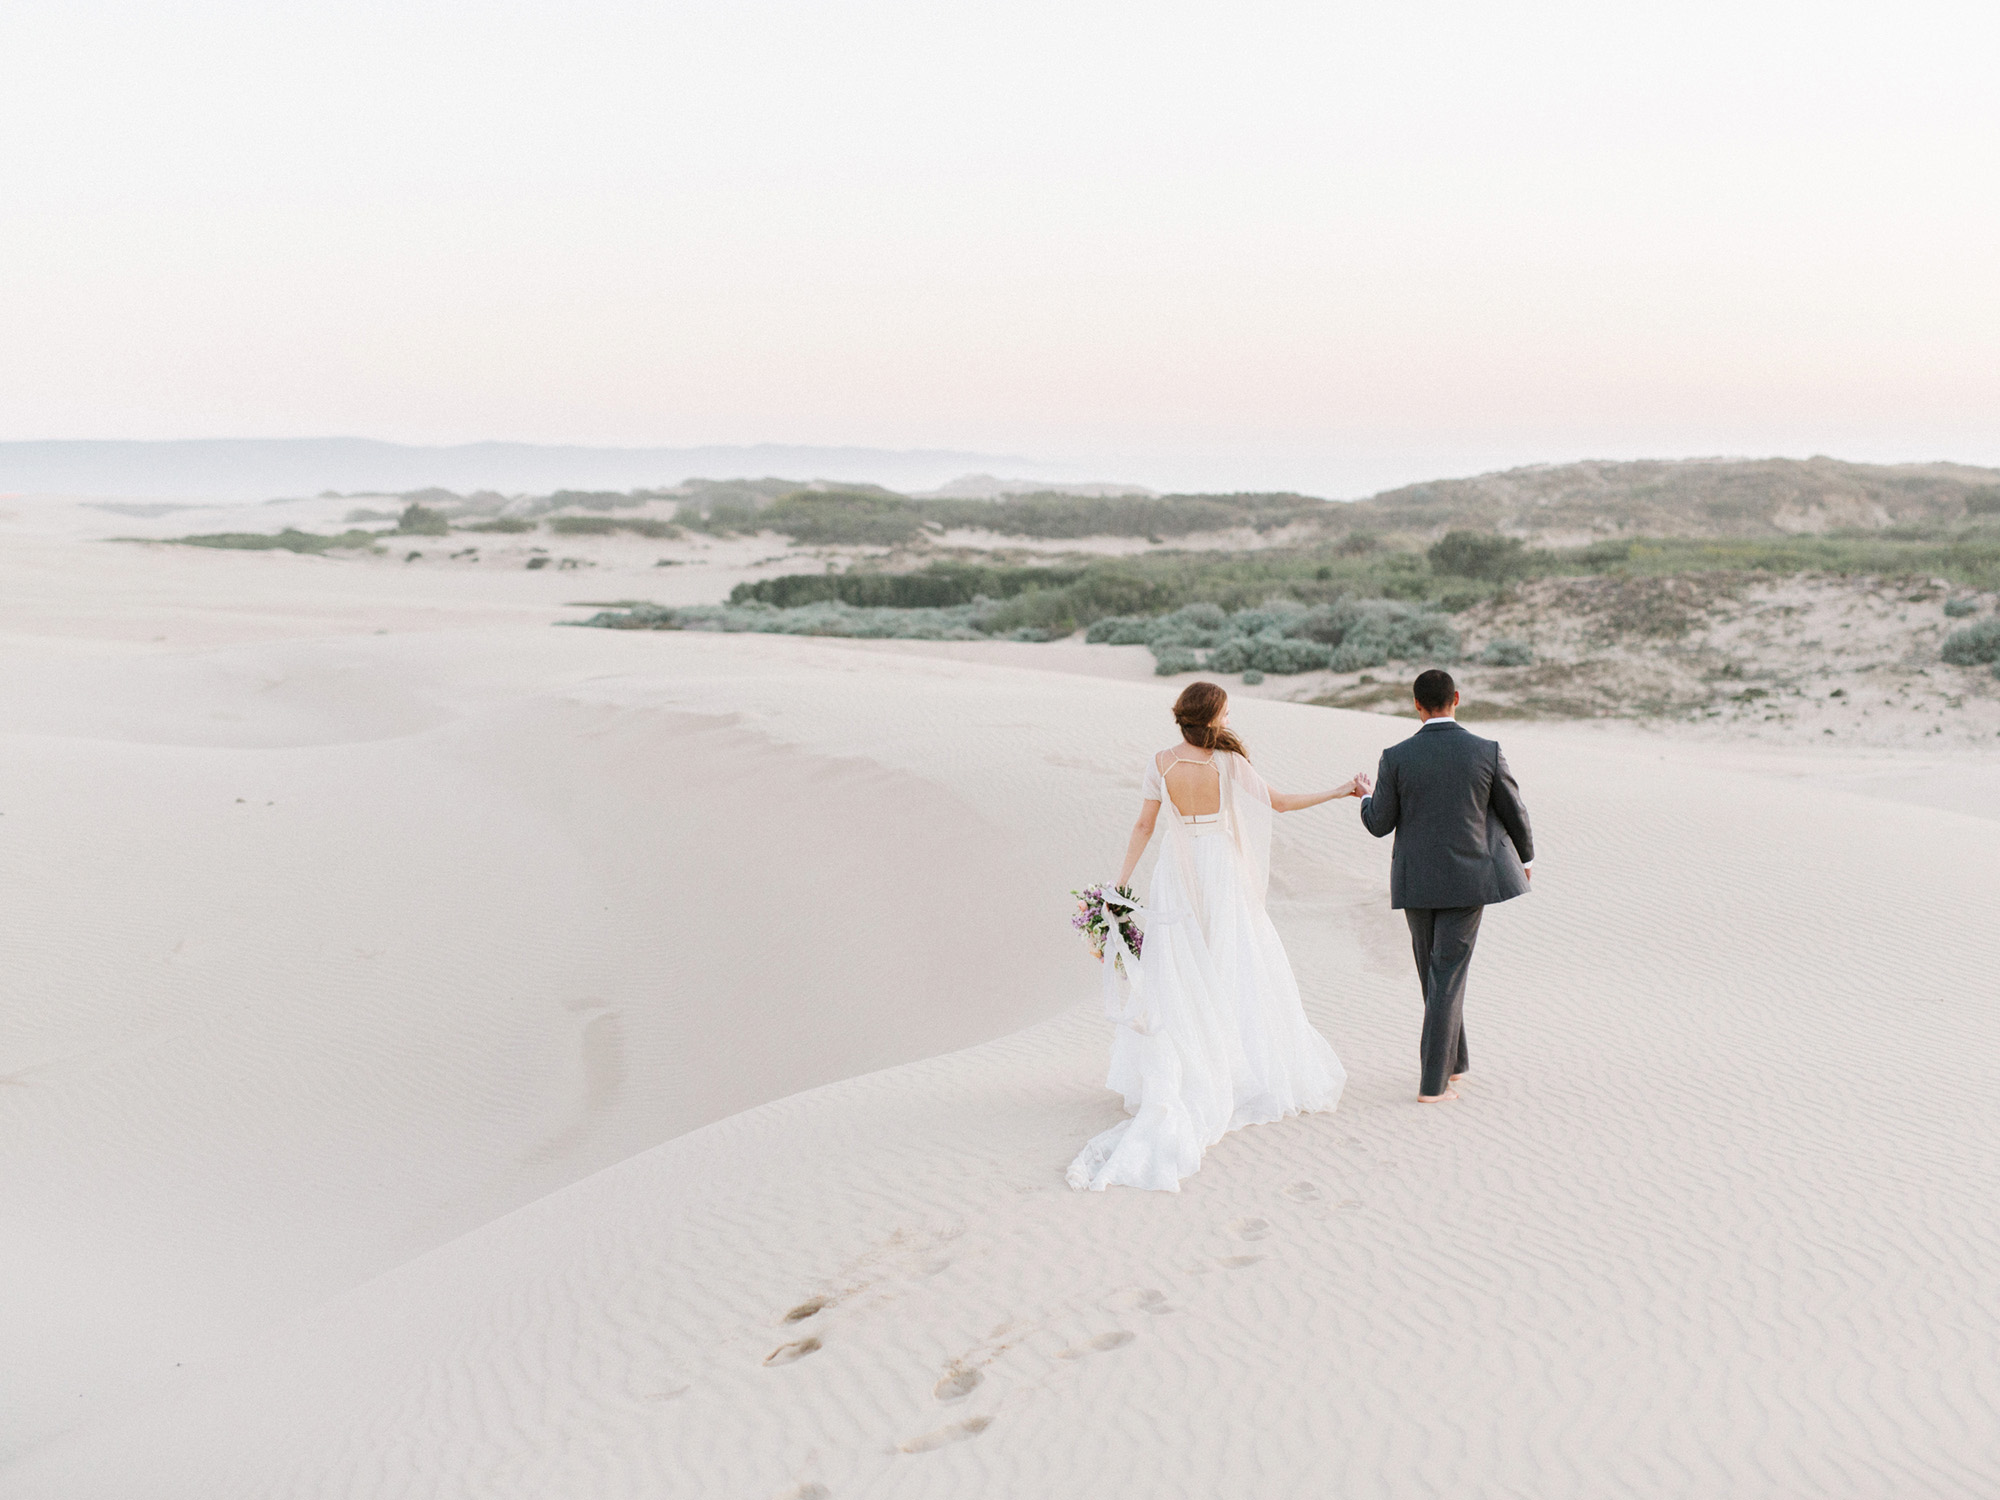 Santa Barbara wedding and elopement photographer Tenth & Grace captures timeless love stories in a signature fine art style